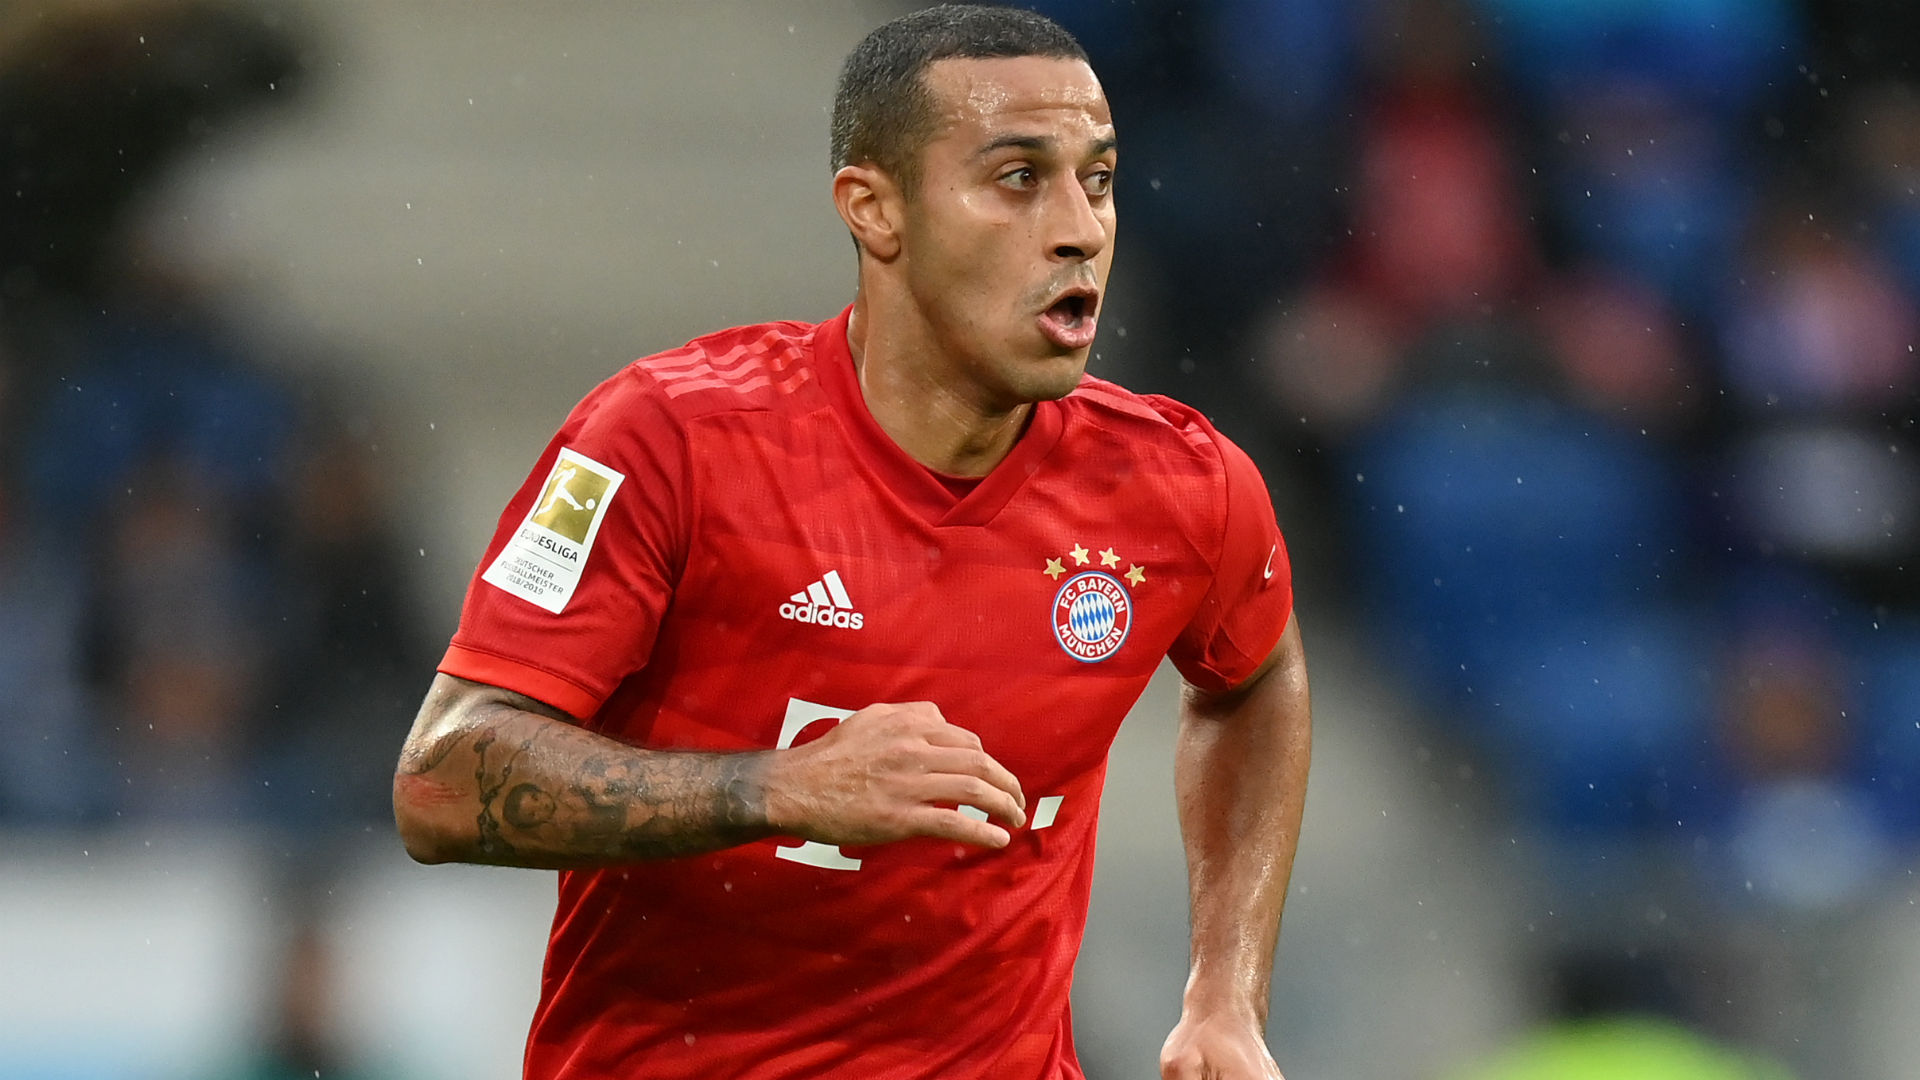 Thiago Alcantara is linked with a move to Liverpool and Jurgen Klopp praised the Bayern Munich midfielder's quality.